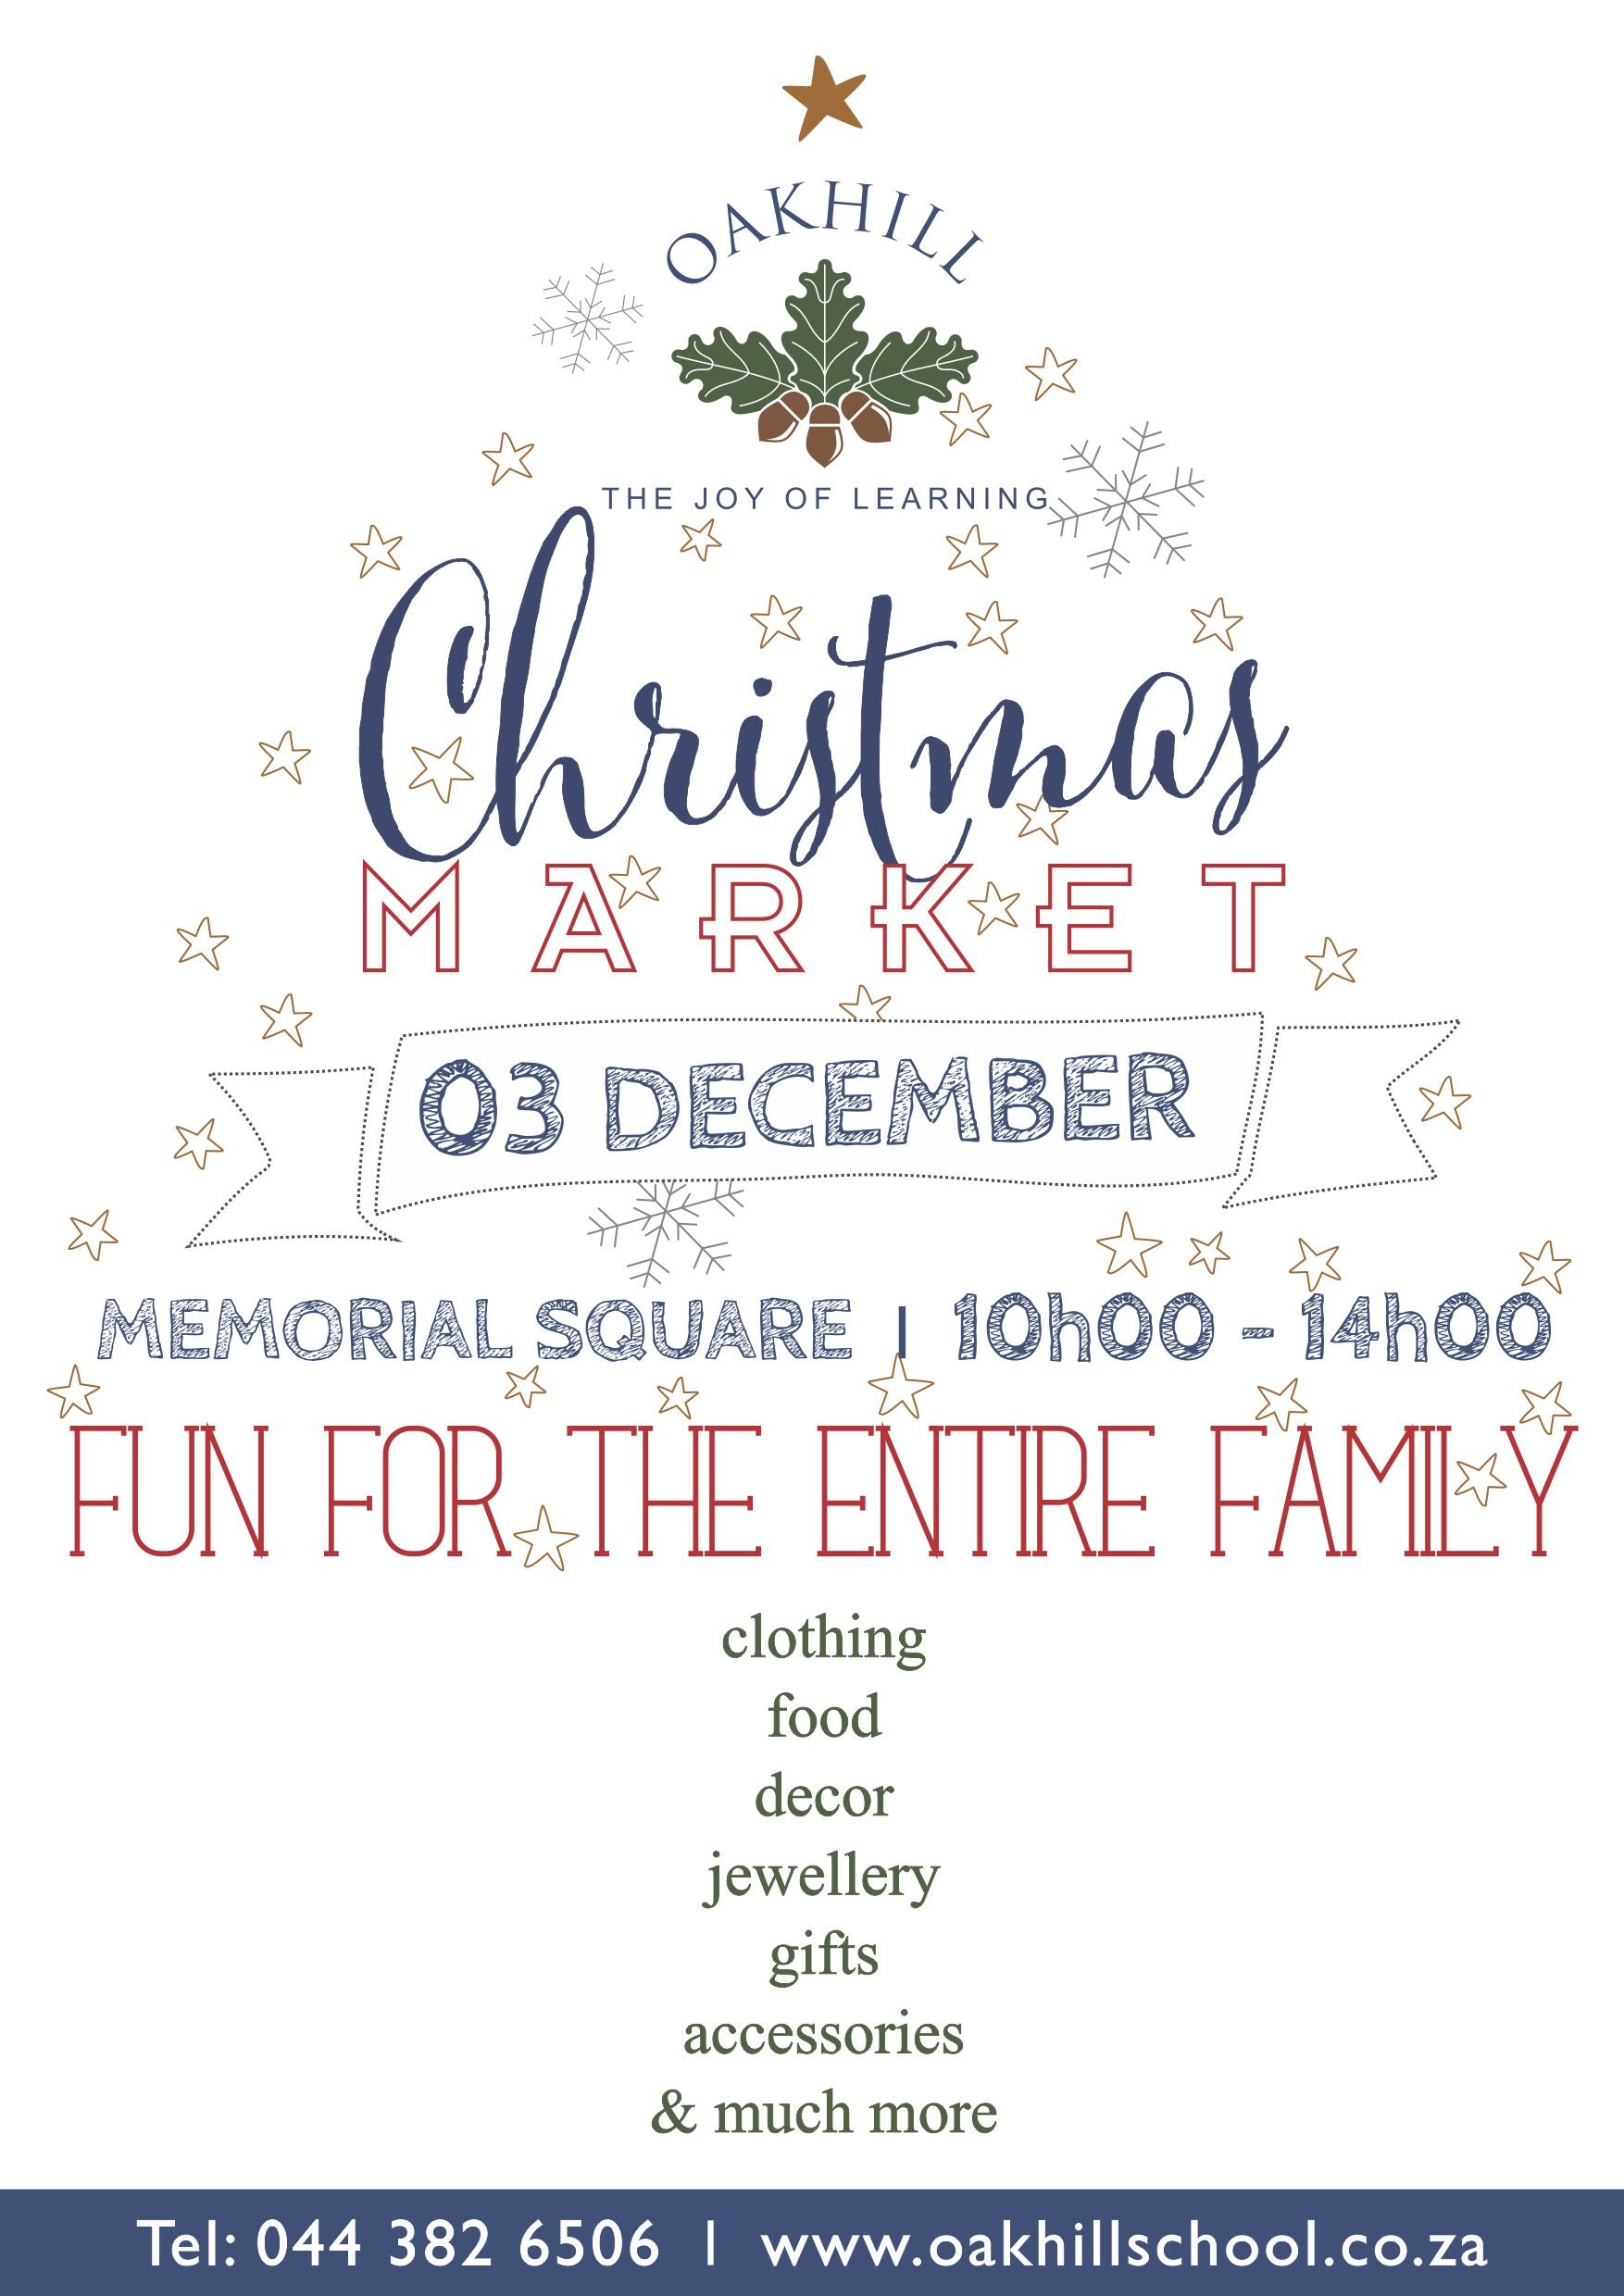 oakhill-christmas-market_a3-poster-2016_low-res